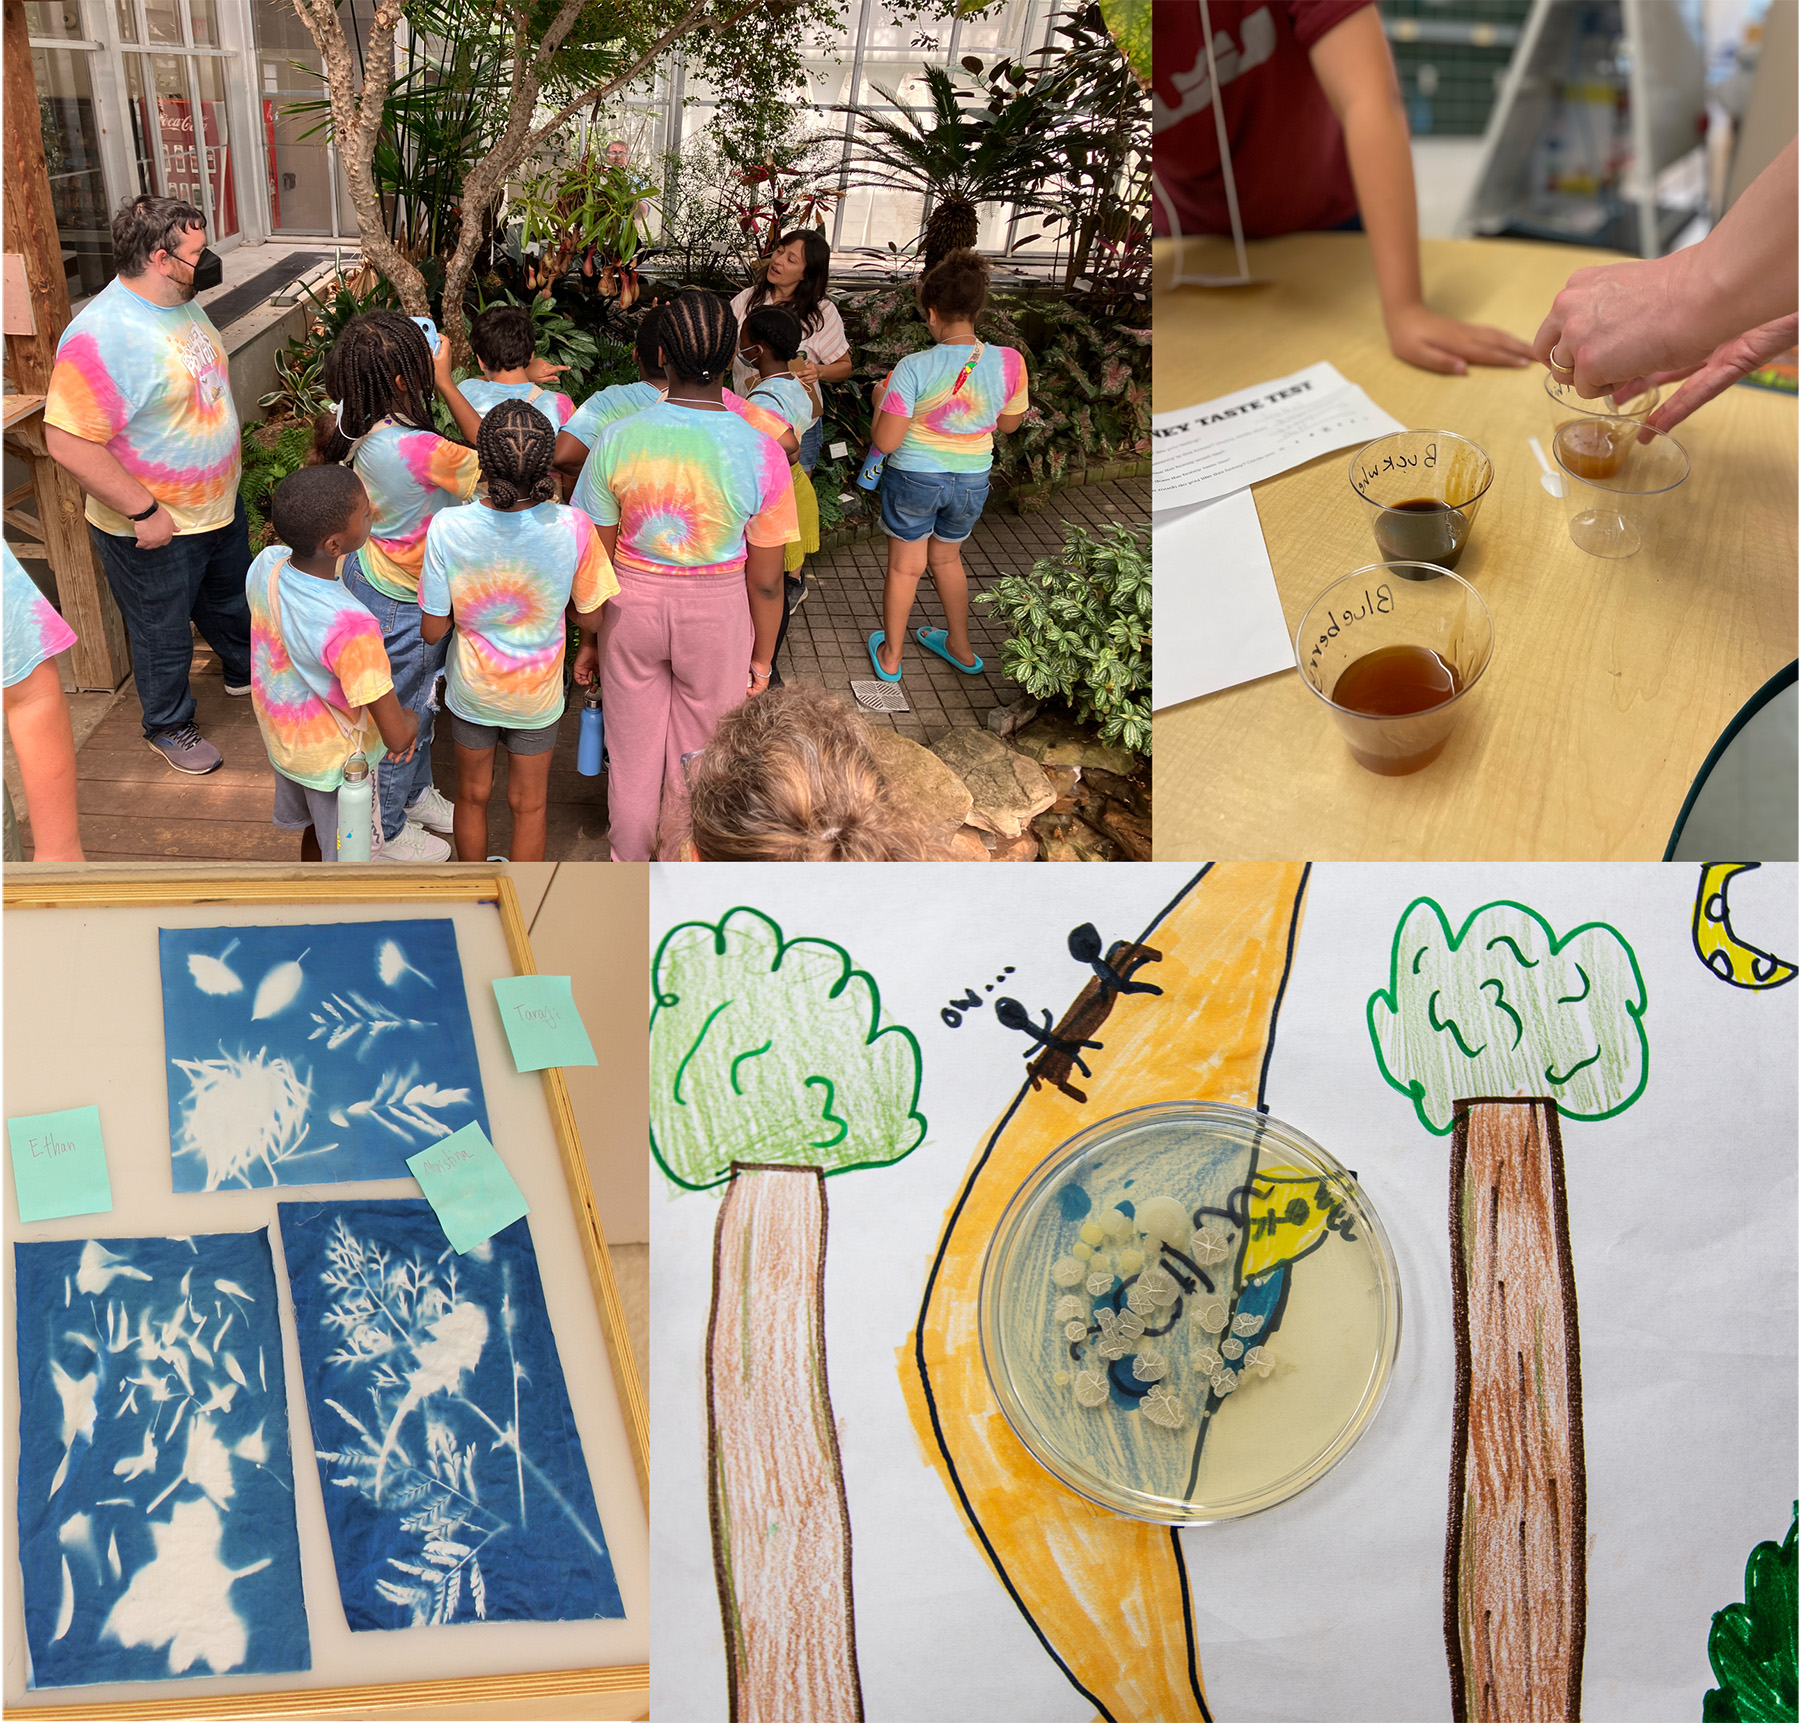 The Pollen Power camp included activities at the University of Illinois and the Stratton Academy of the Arts. Clockwise from top left: The campers visited greenhouses on the university campus, tasted different types of honey, grew bacteria that were isolated from their classrooms, and created cyanotypes with leaves and flowers.